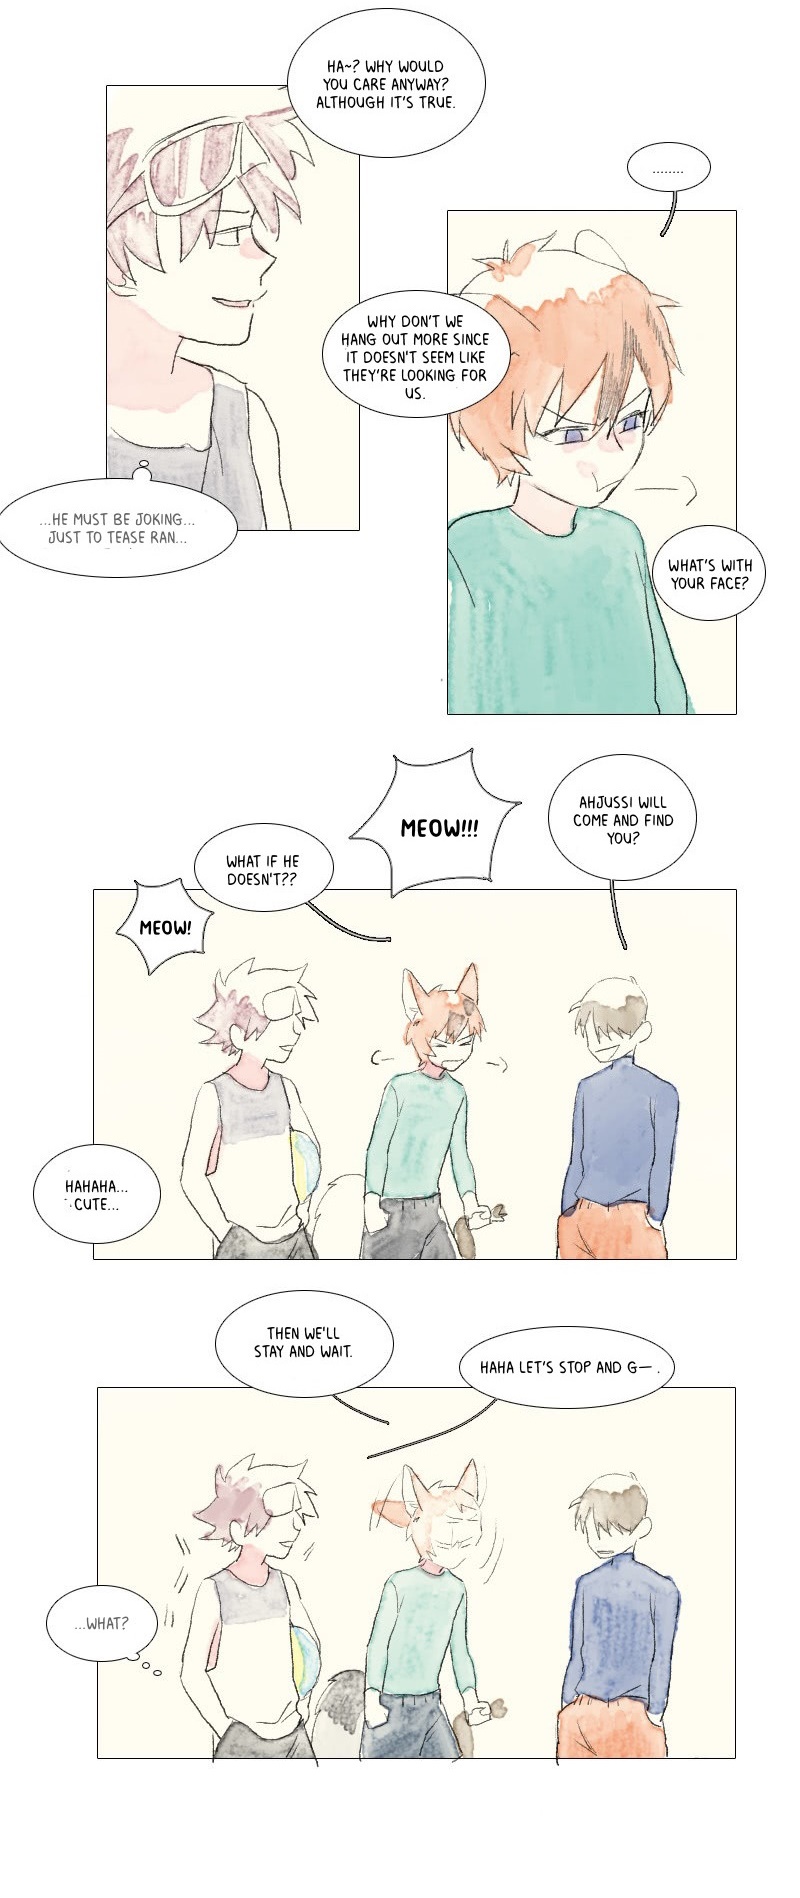 Catboy Catday Ch.27